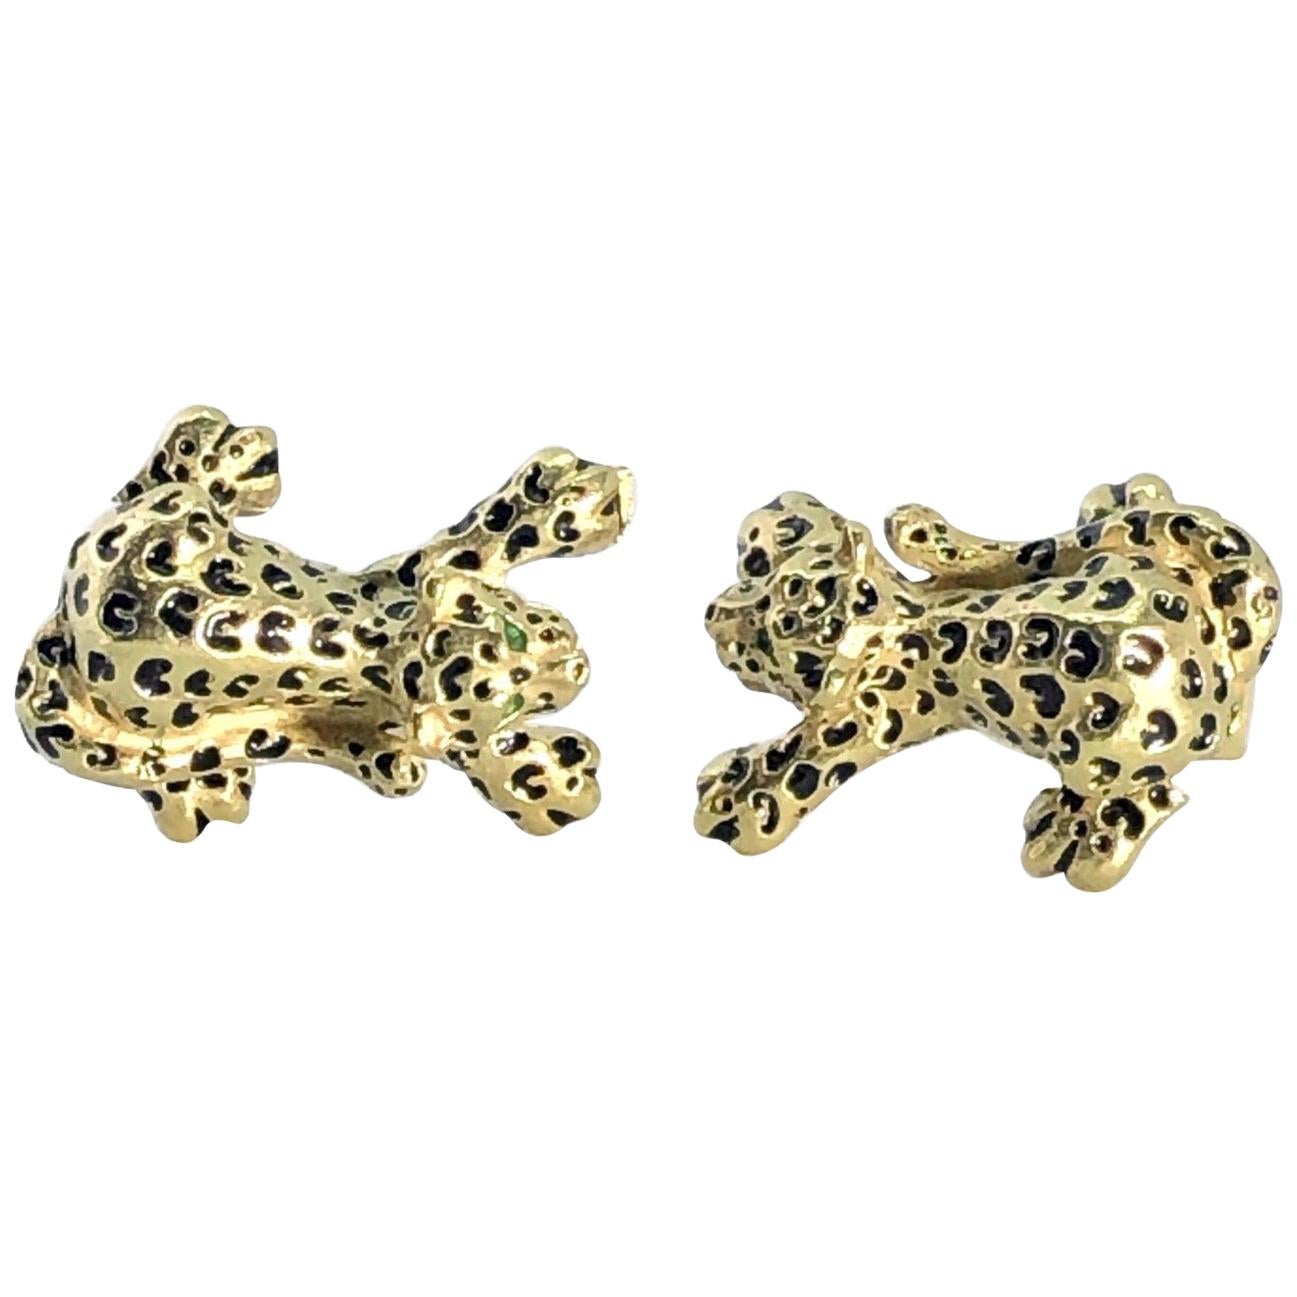 Vintage Unisex Cufflinks of Tigers Made In Italy  In 18k Gold With Emerald Eyes For Sale